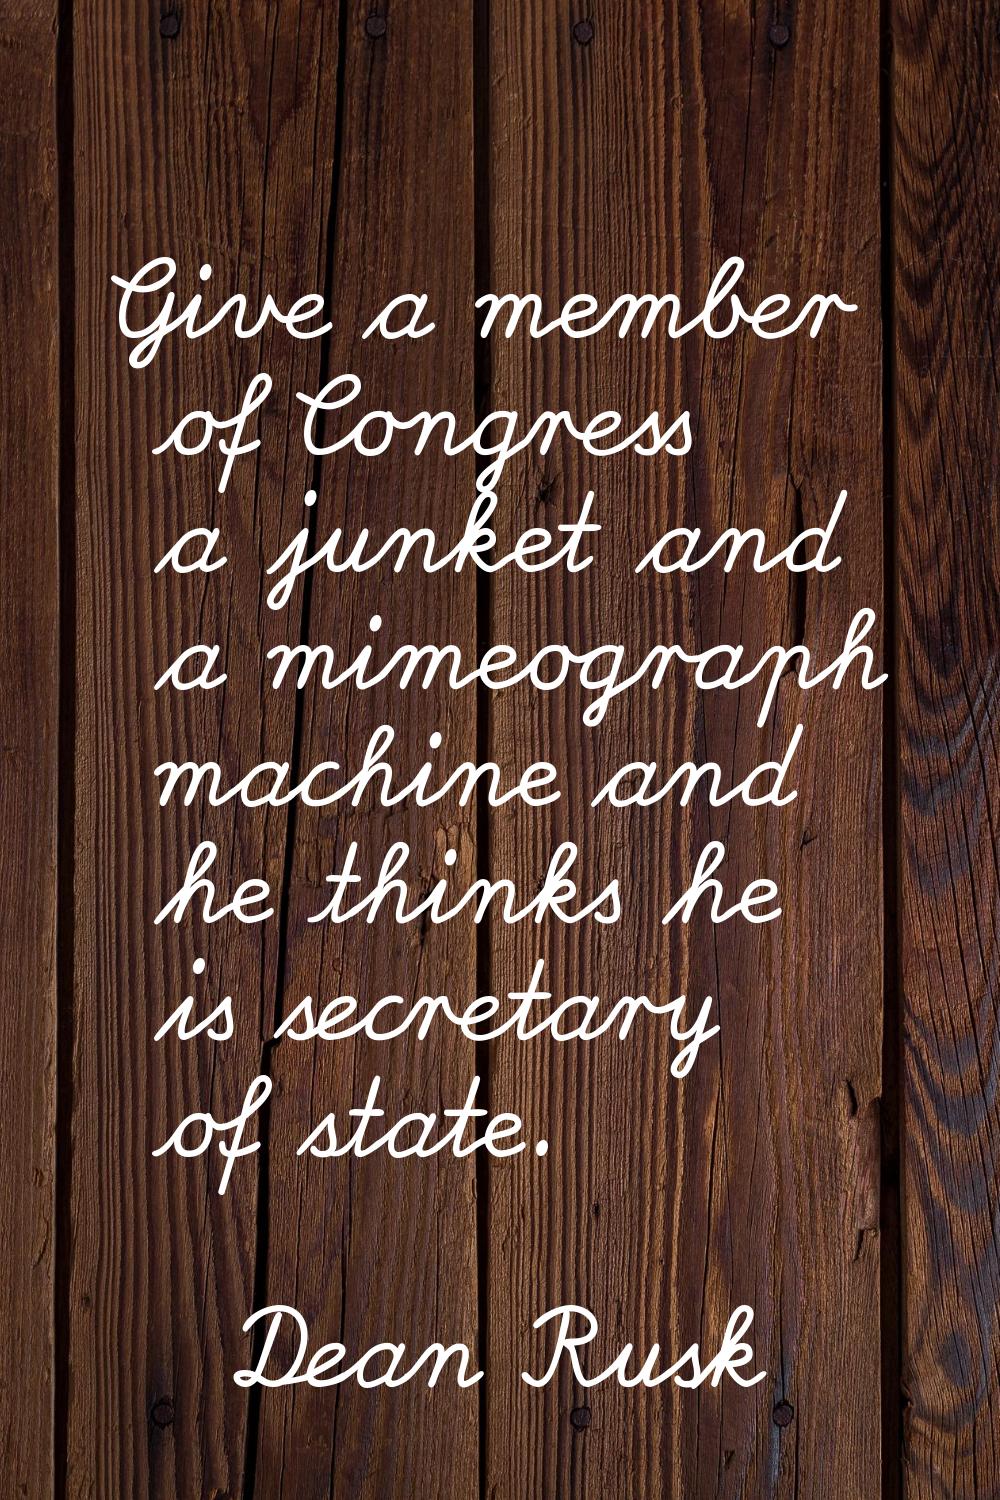 Give a member of Congress a junket and a mimeograph machine and he thinks he is secretary of state.